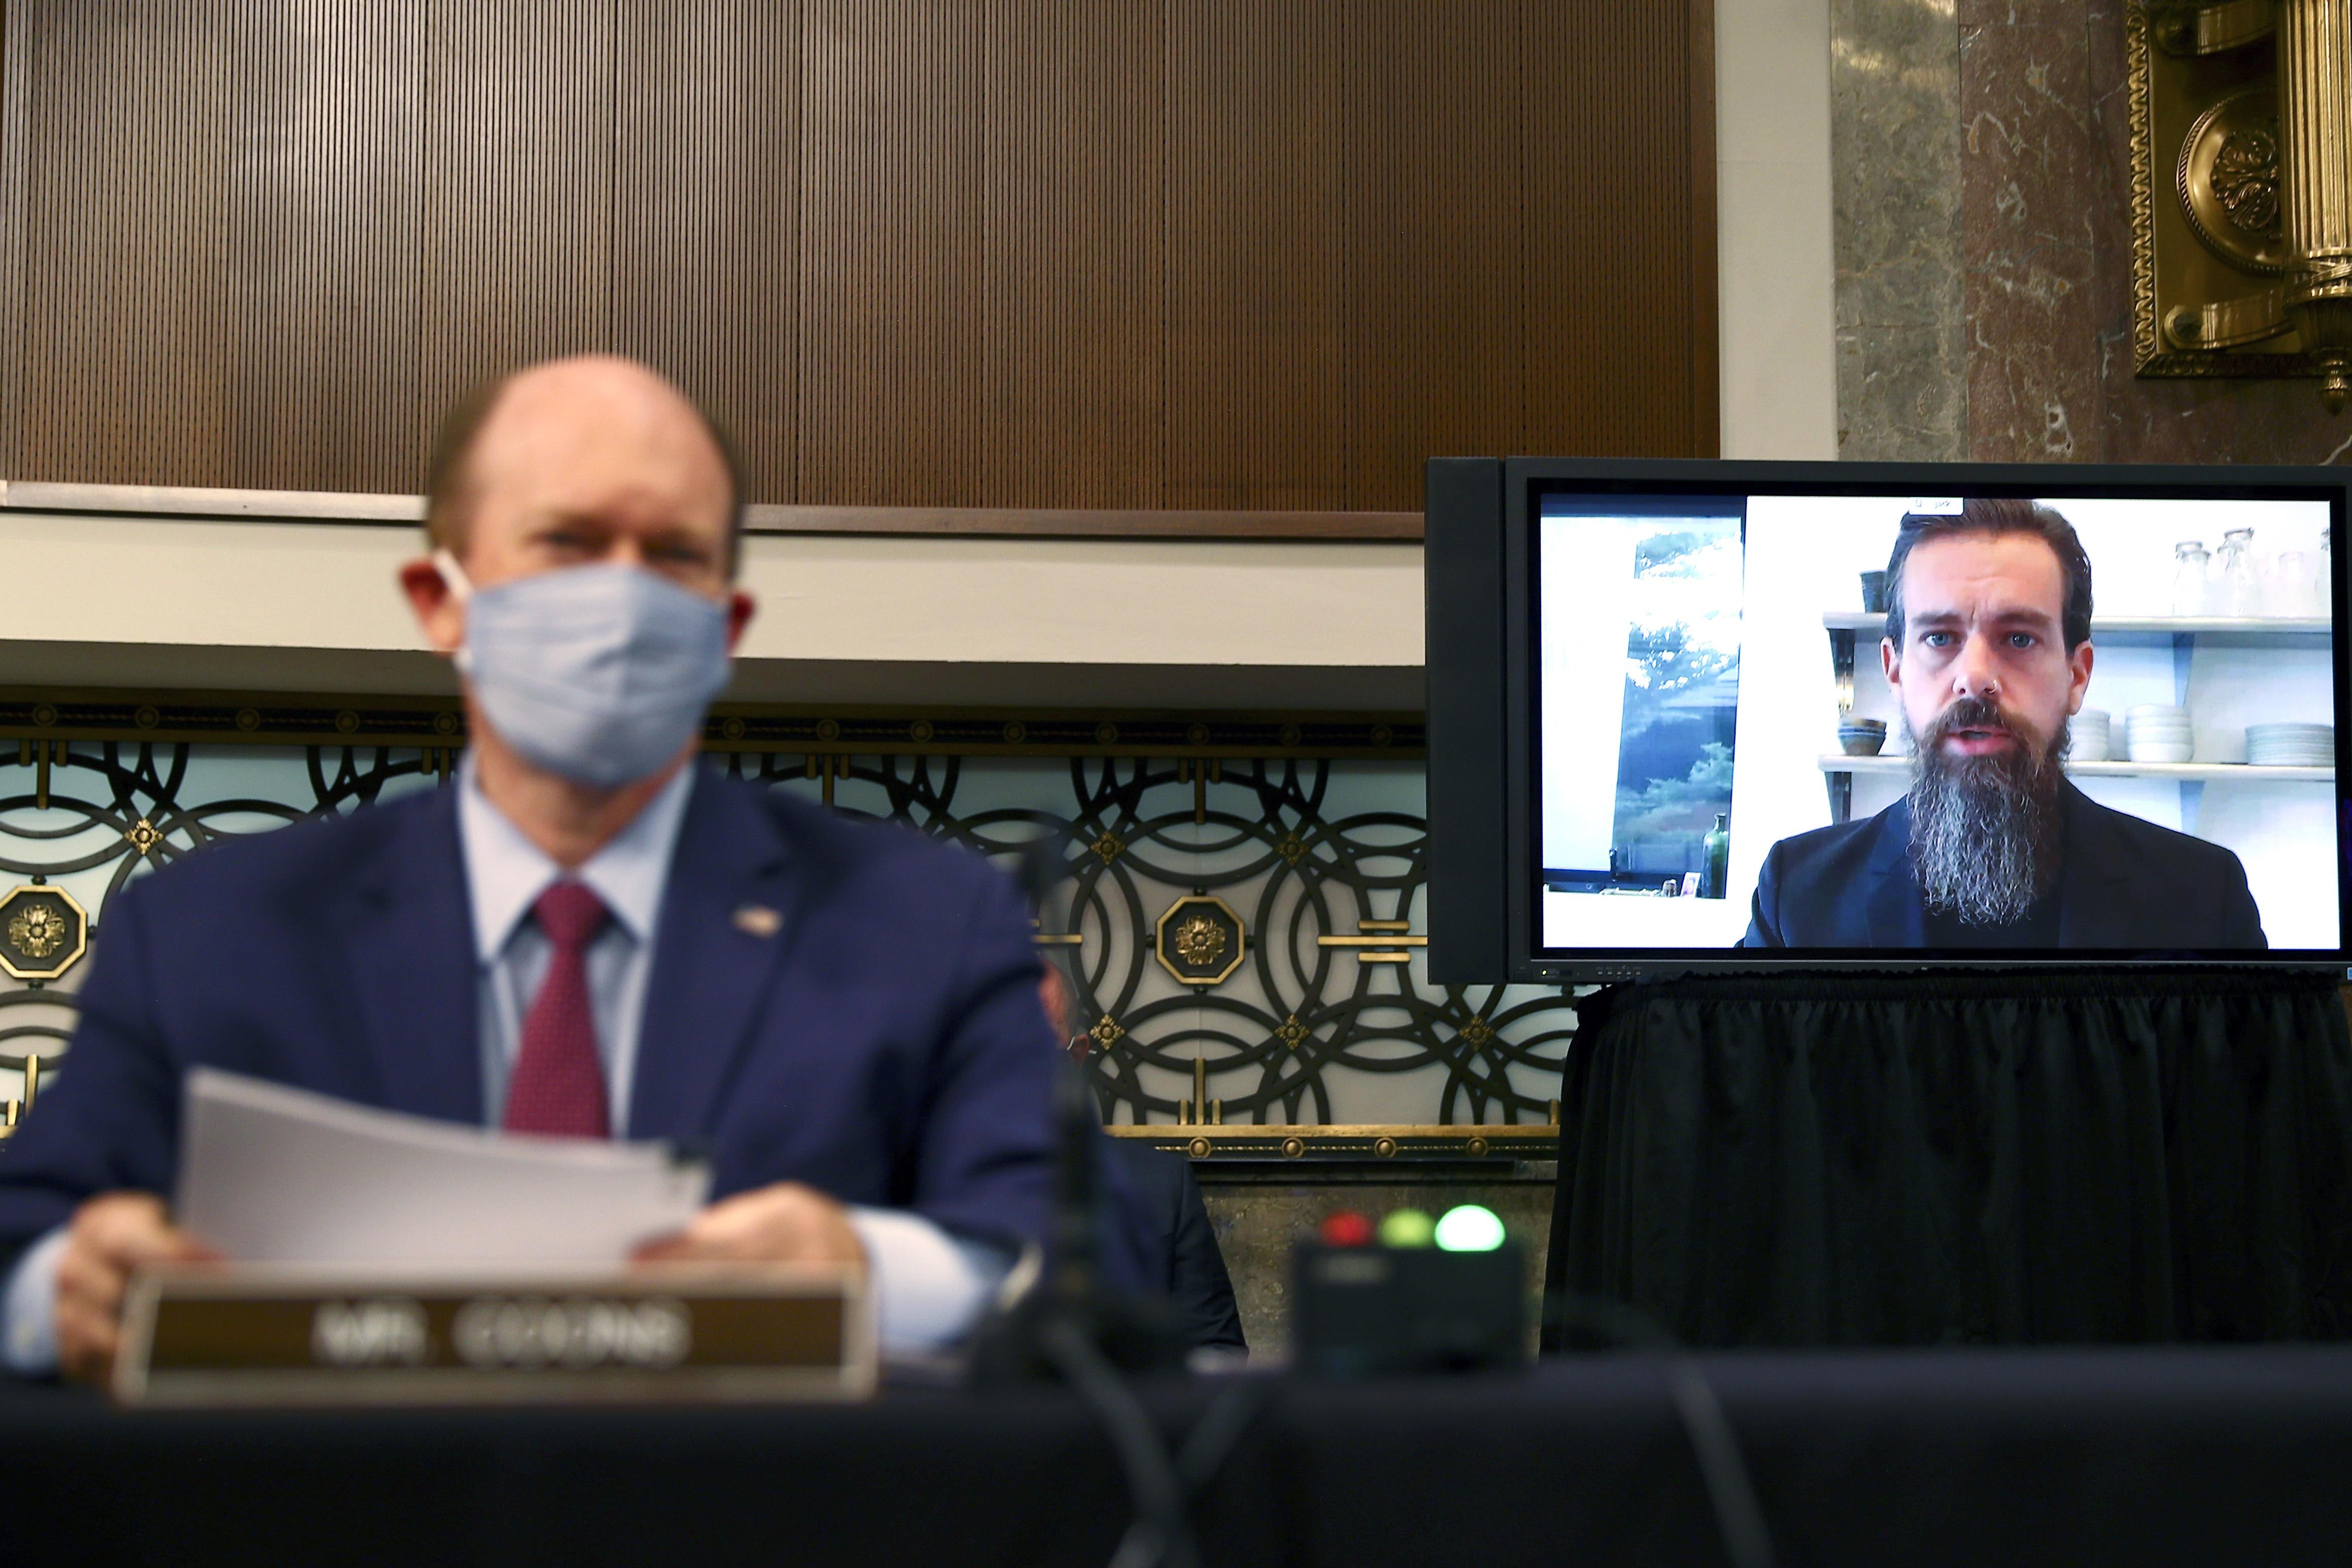 On the left, an out-of-focus man sitting behind a nameplate; on the right, a man with a beard appears on a TV screen.